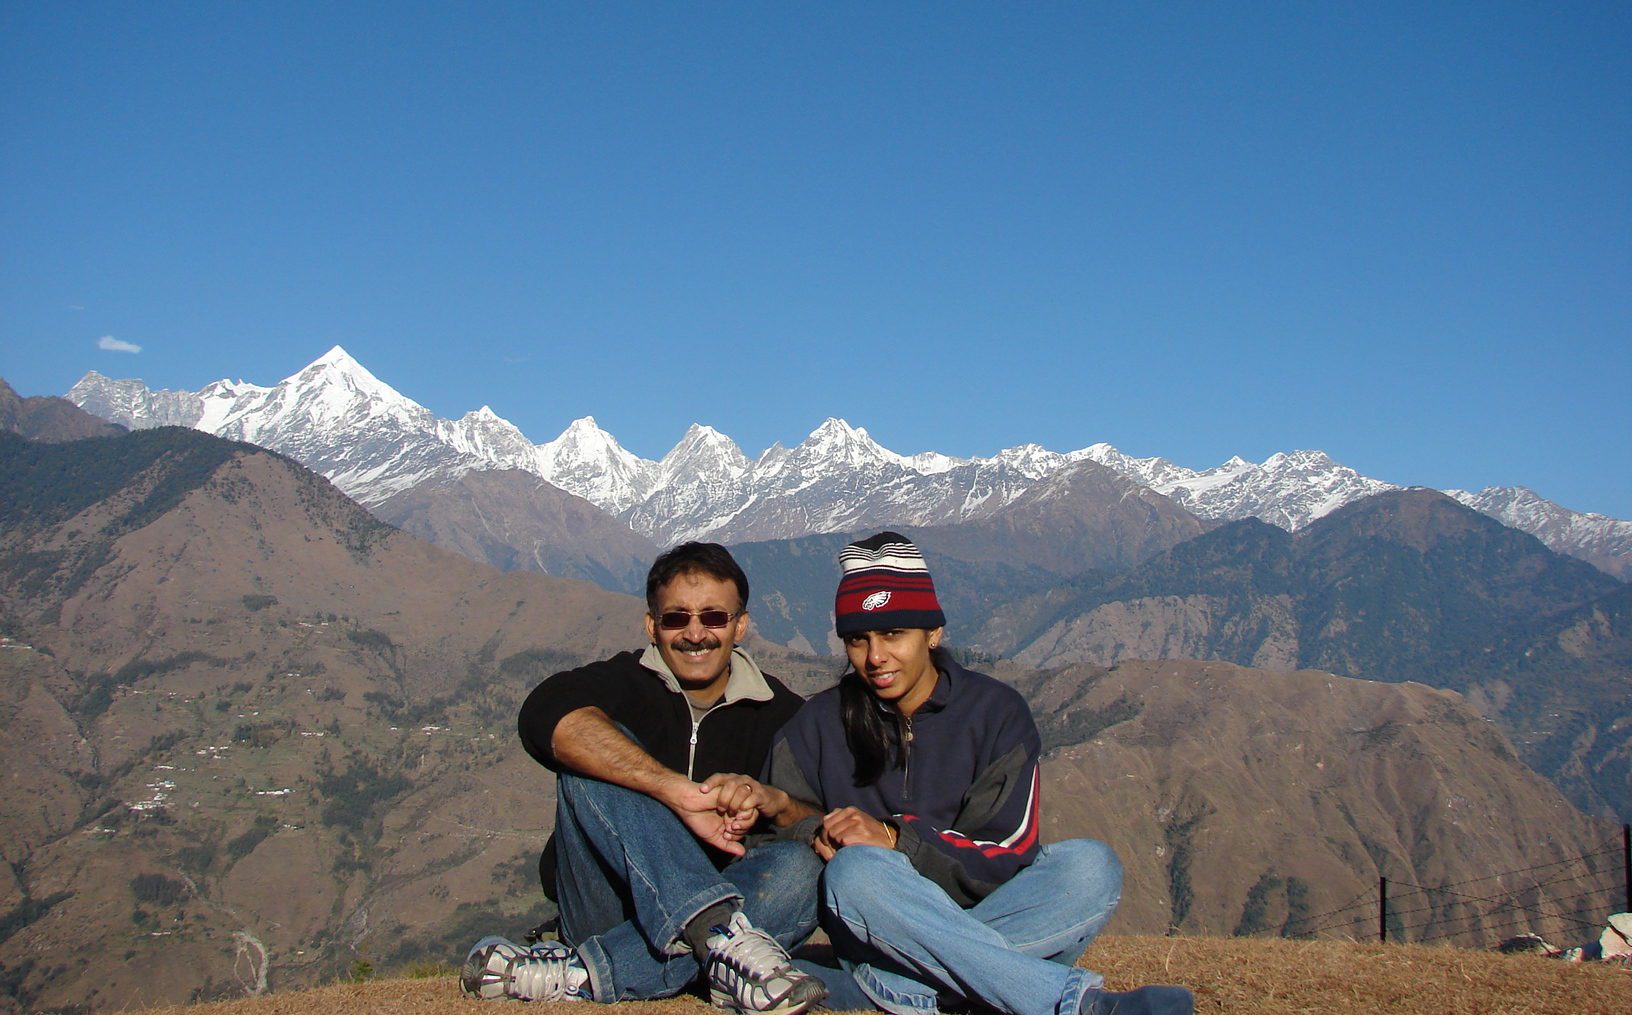 A couple squatting on the ground with mountains and snowcapped peaks behind under a blue sky